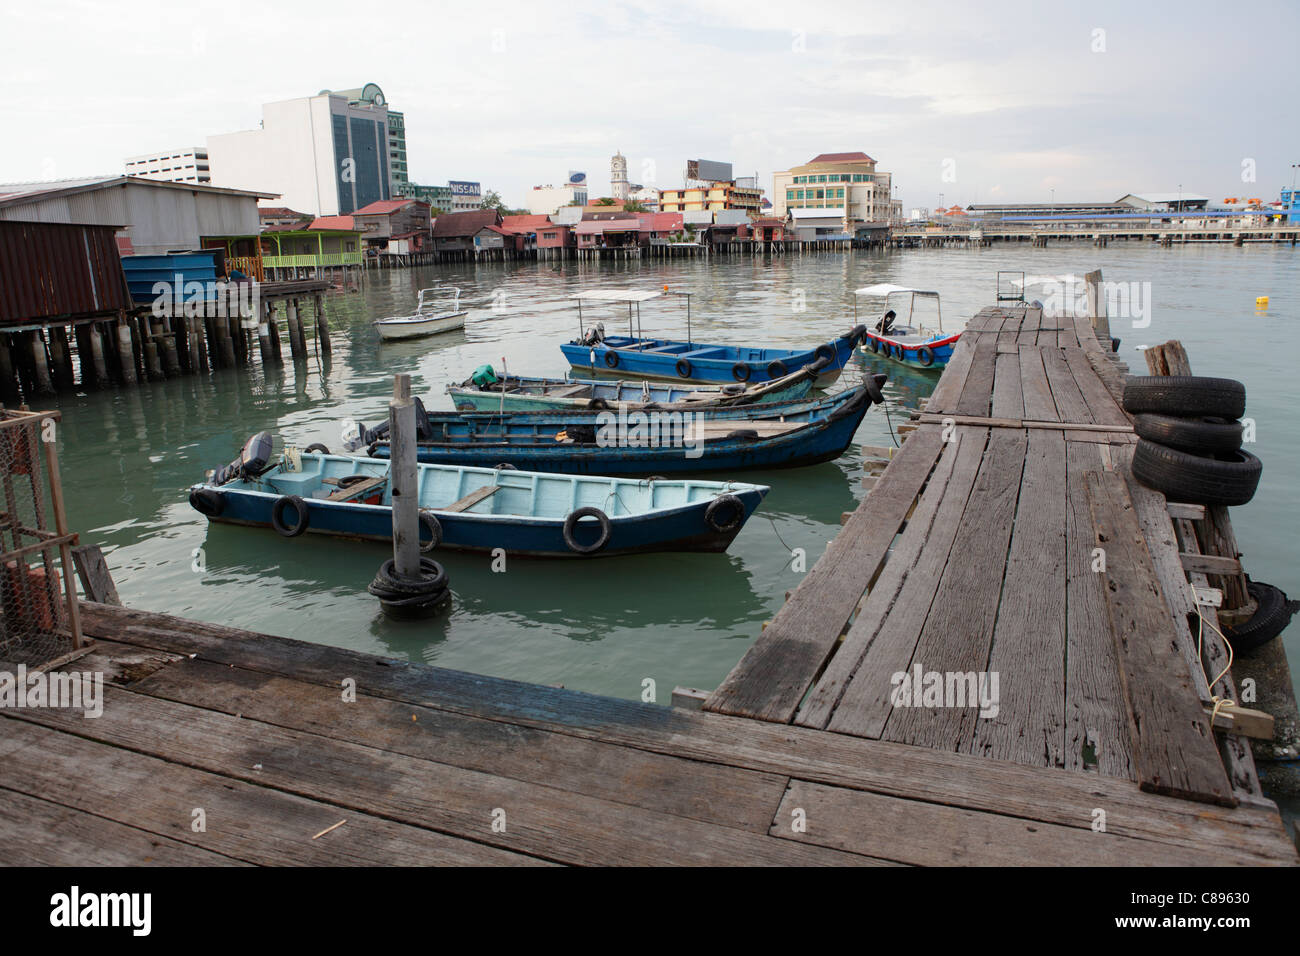 Boats at clan weld quay, Georgetown, Penang, Malaysia Stock Photo